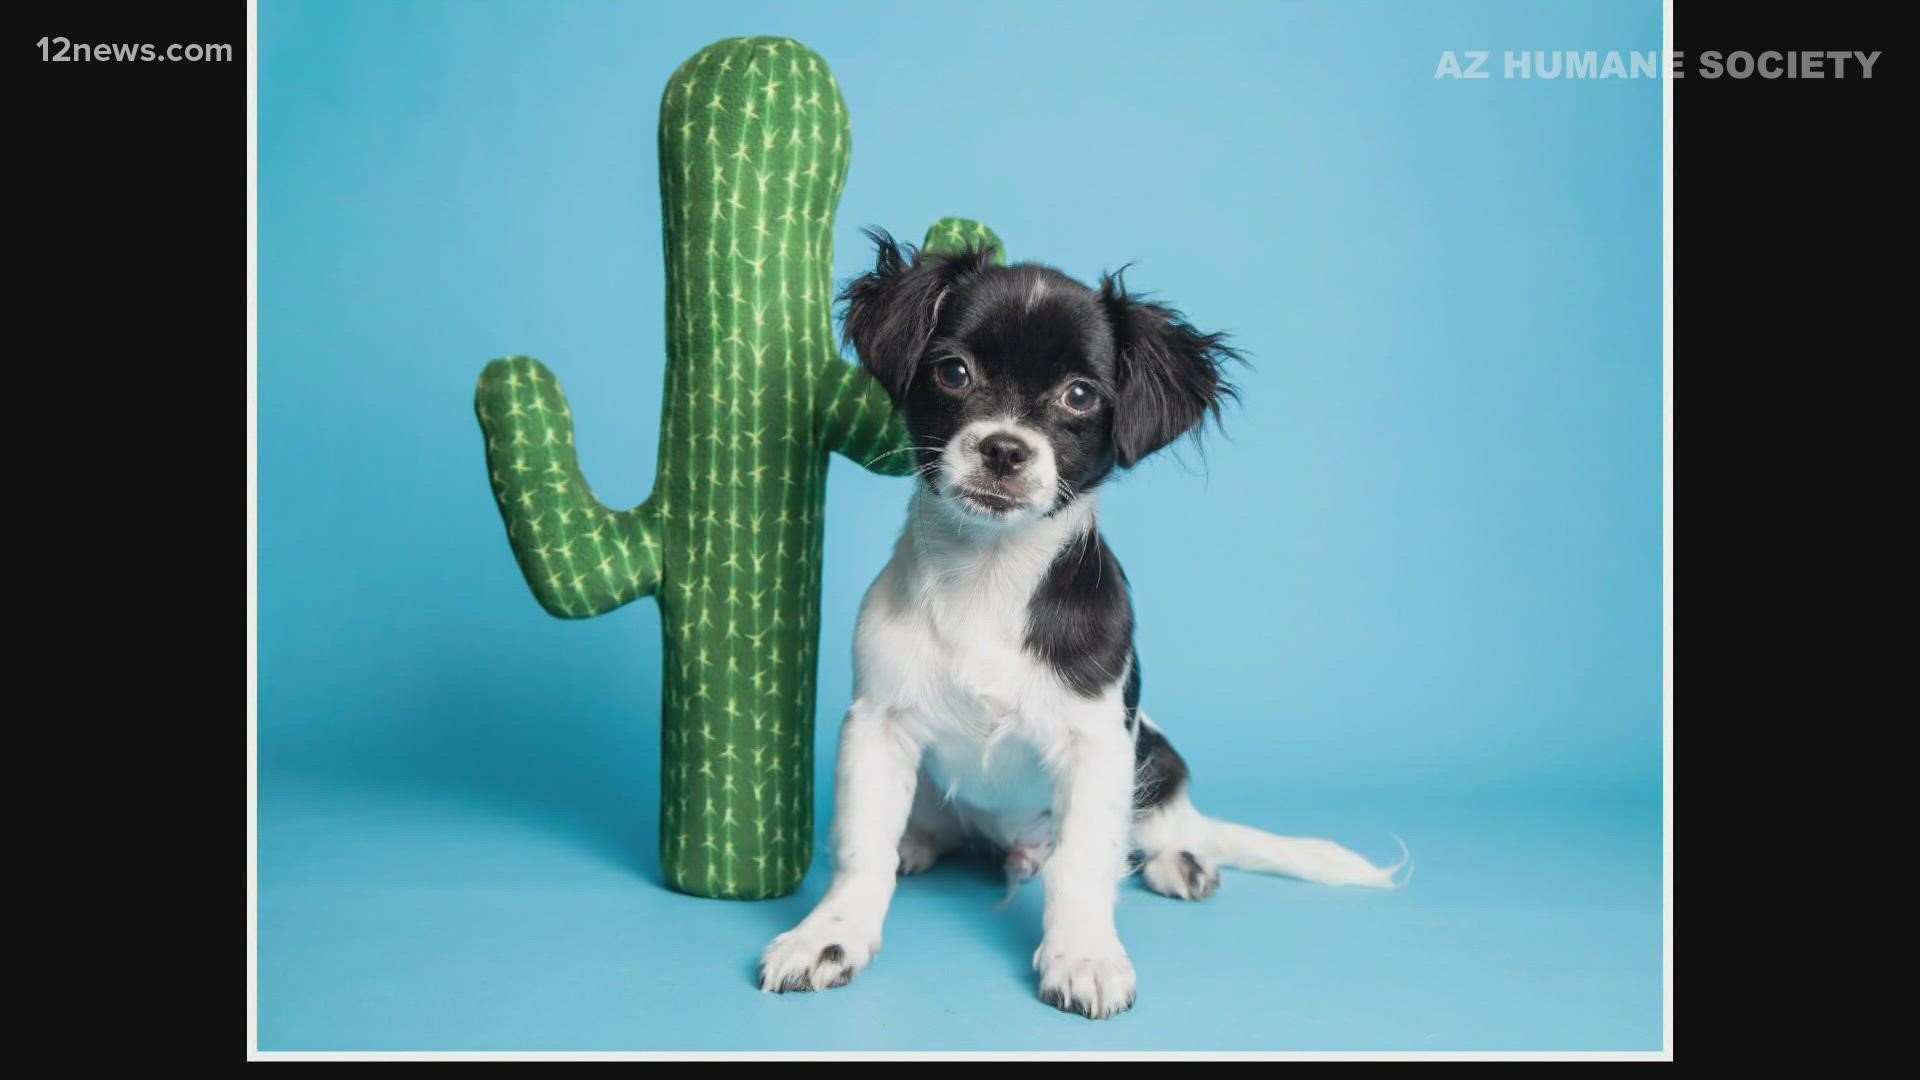 After veterinarians successfully plucked cactus needles off the face of a five-month-old Chihuahua, the dog, now named "Cholla Charlie", is looking for a new home.